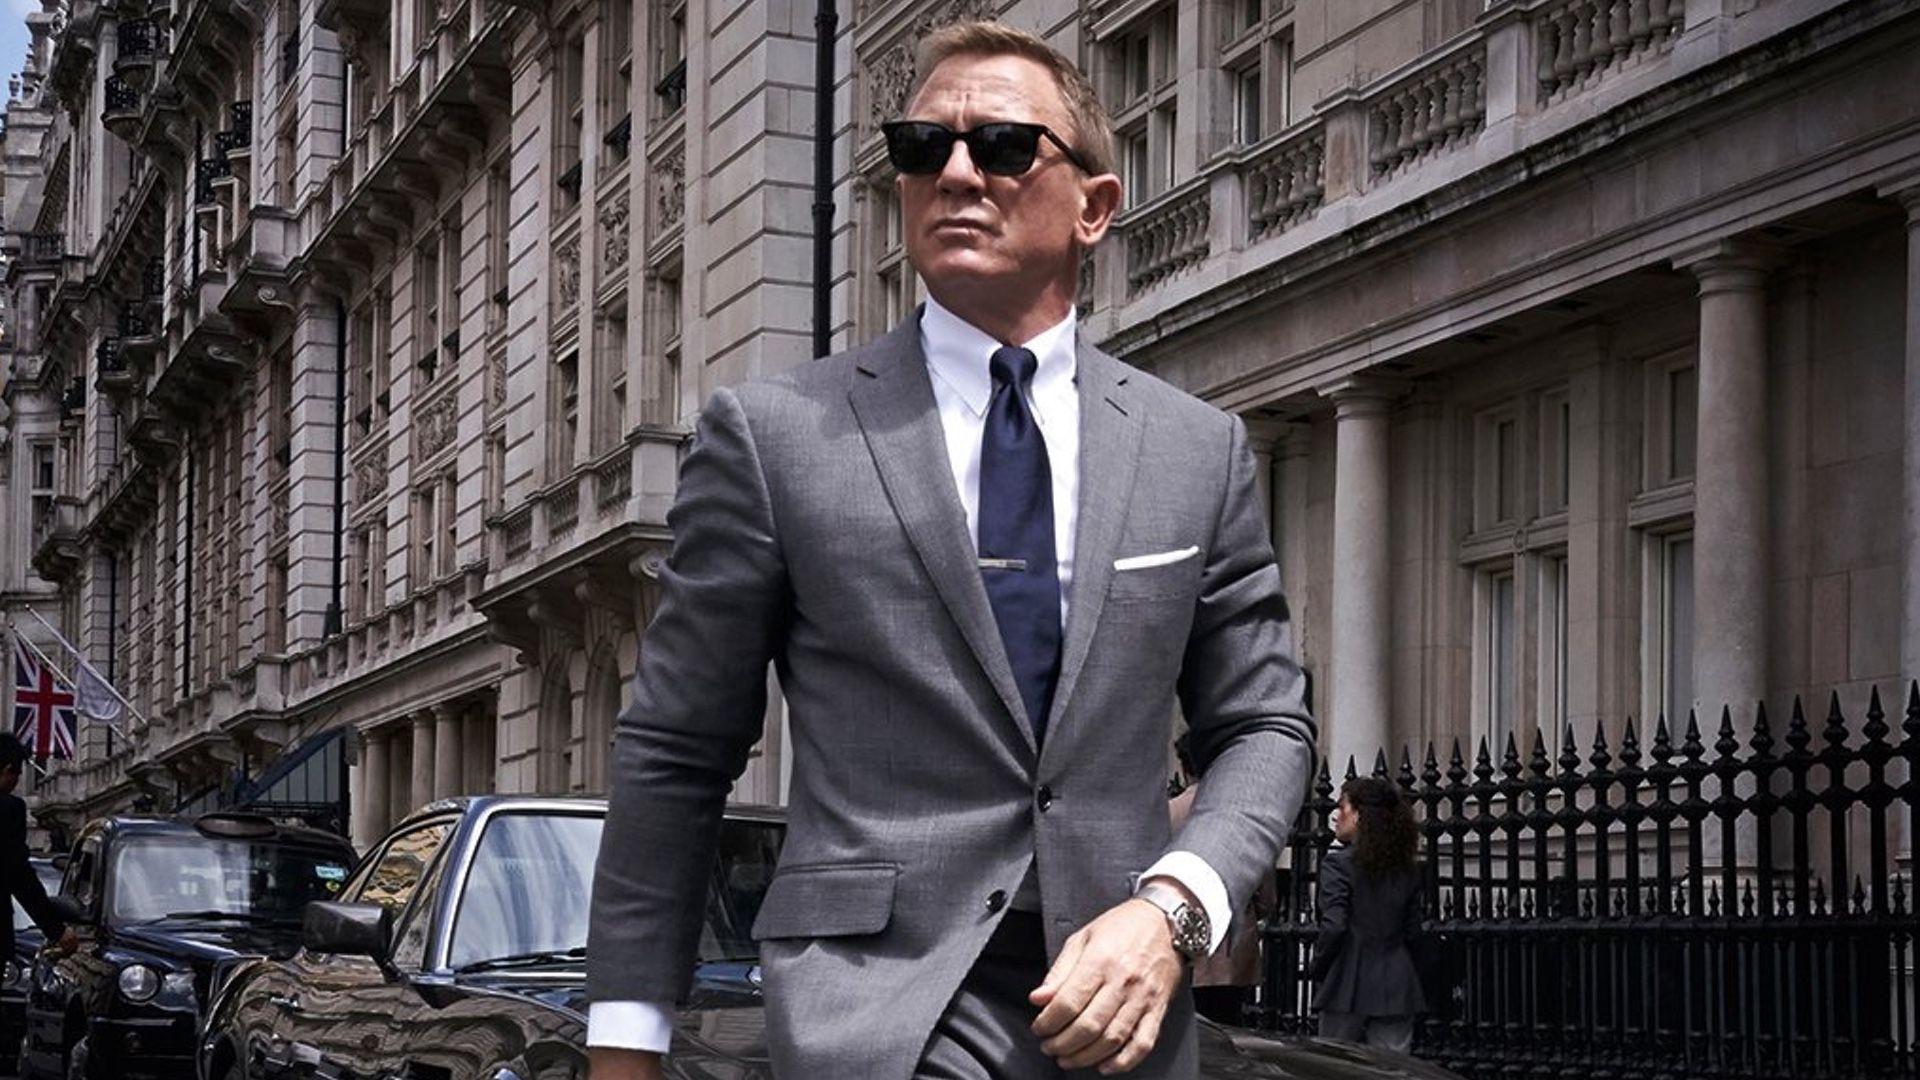 No Time To Die: Bond 25 Title and Release Date Announced